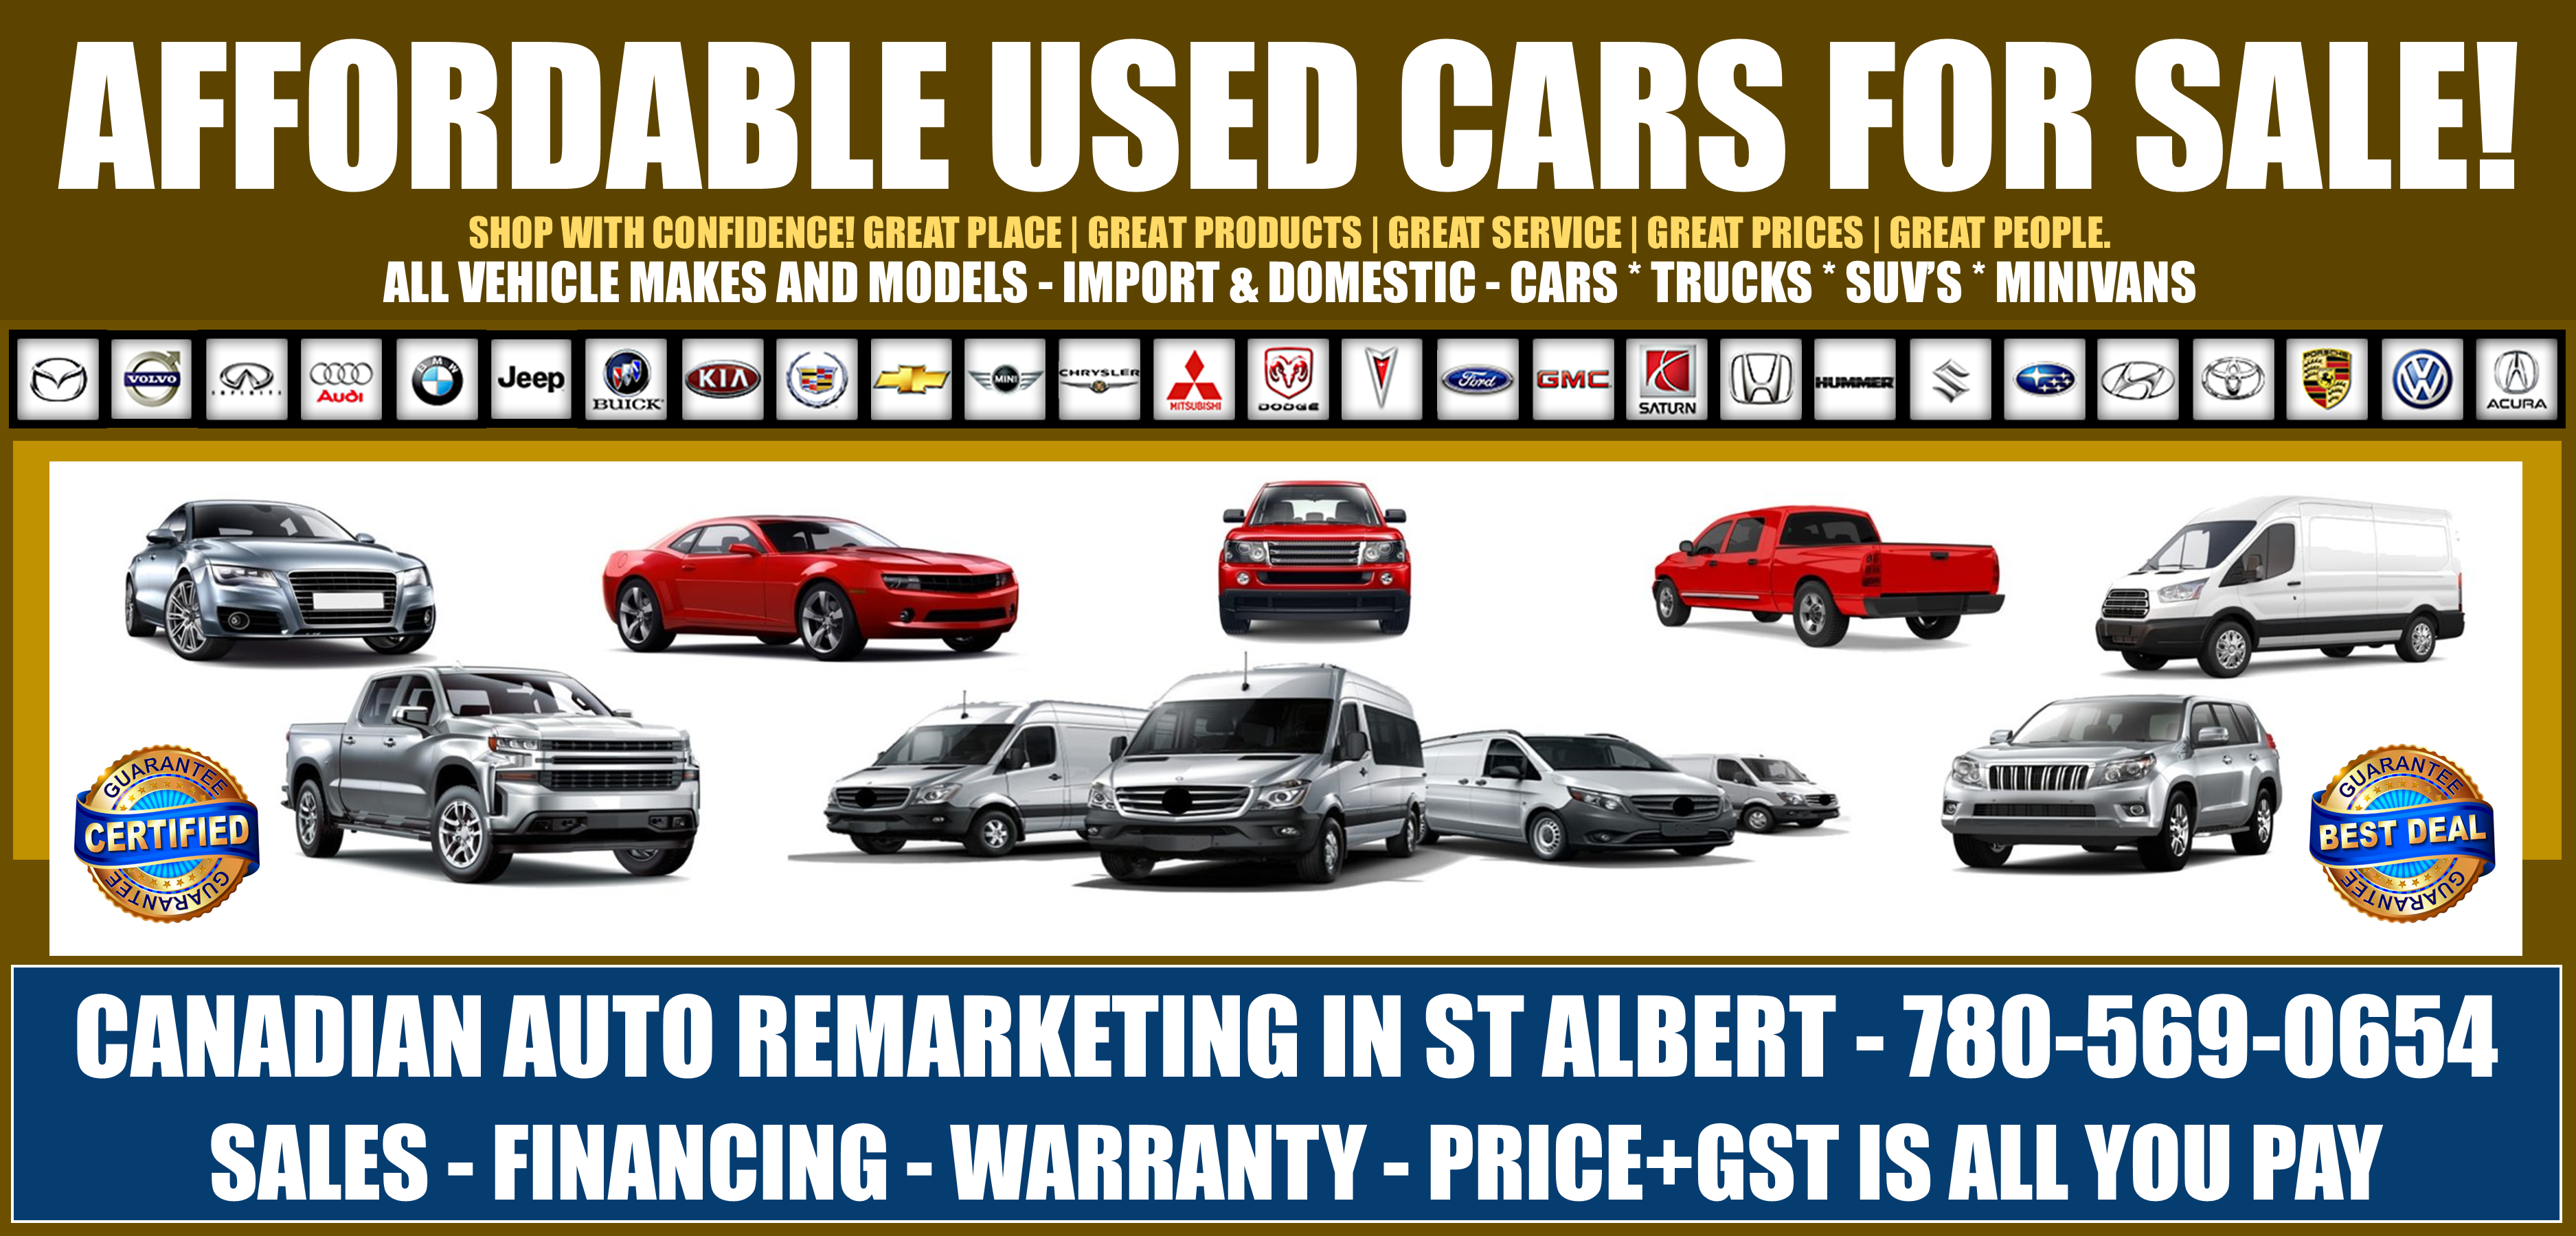 Need affordable used cars? 